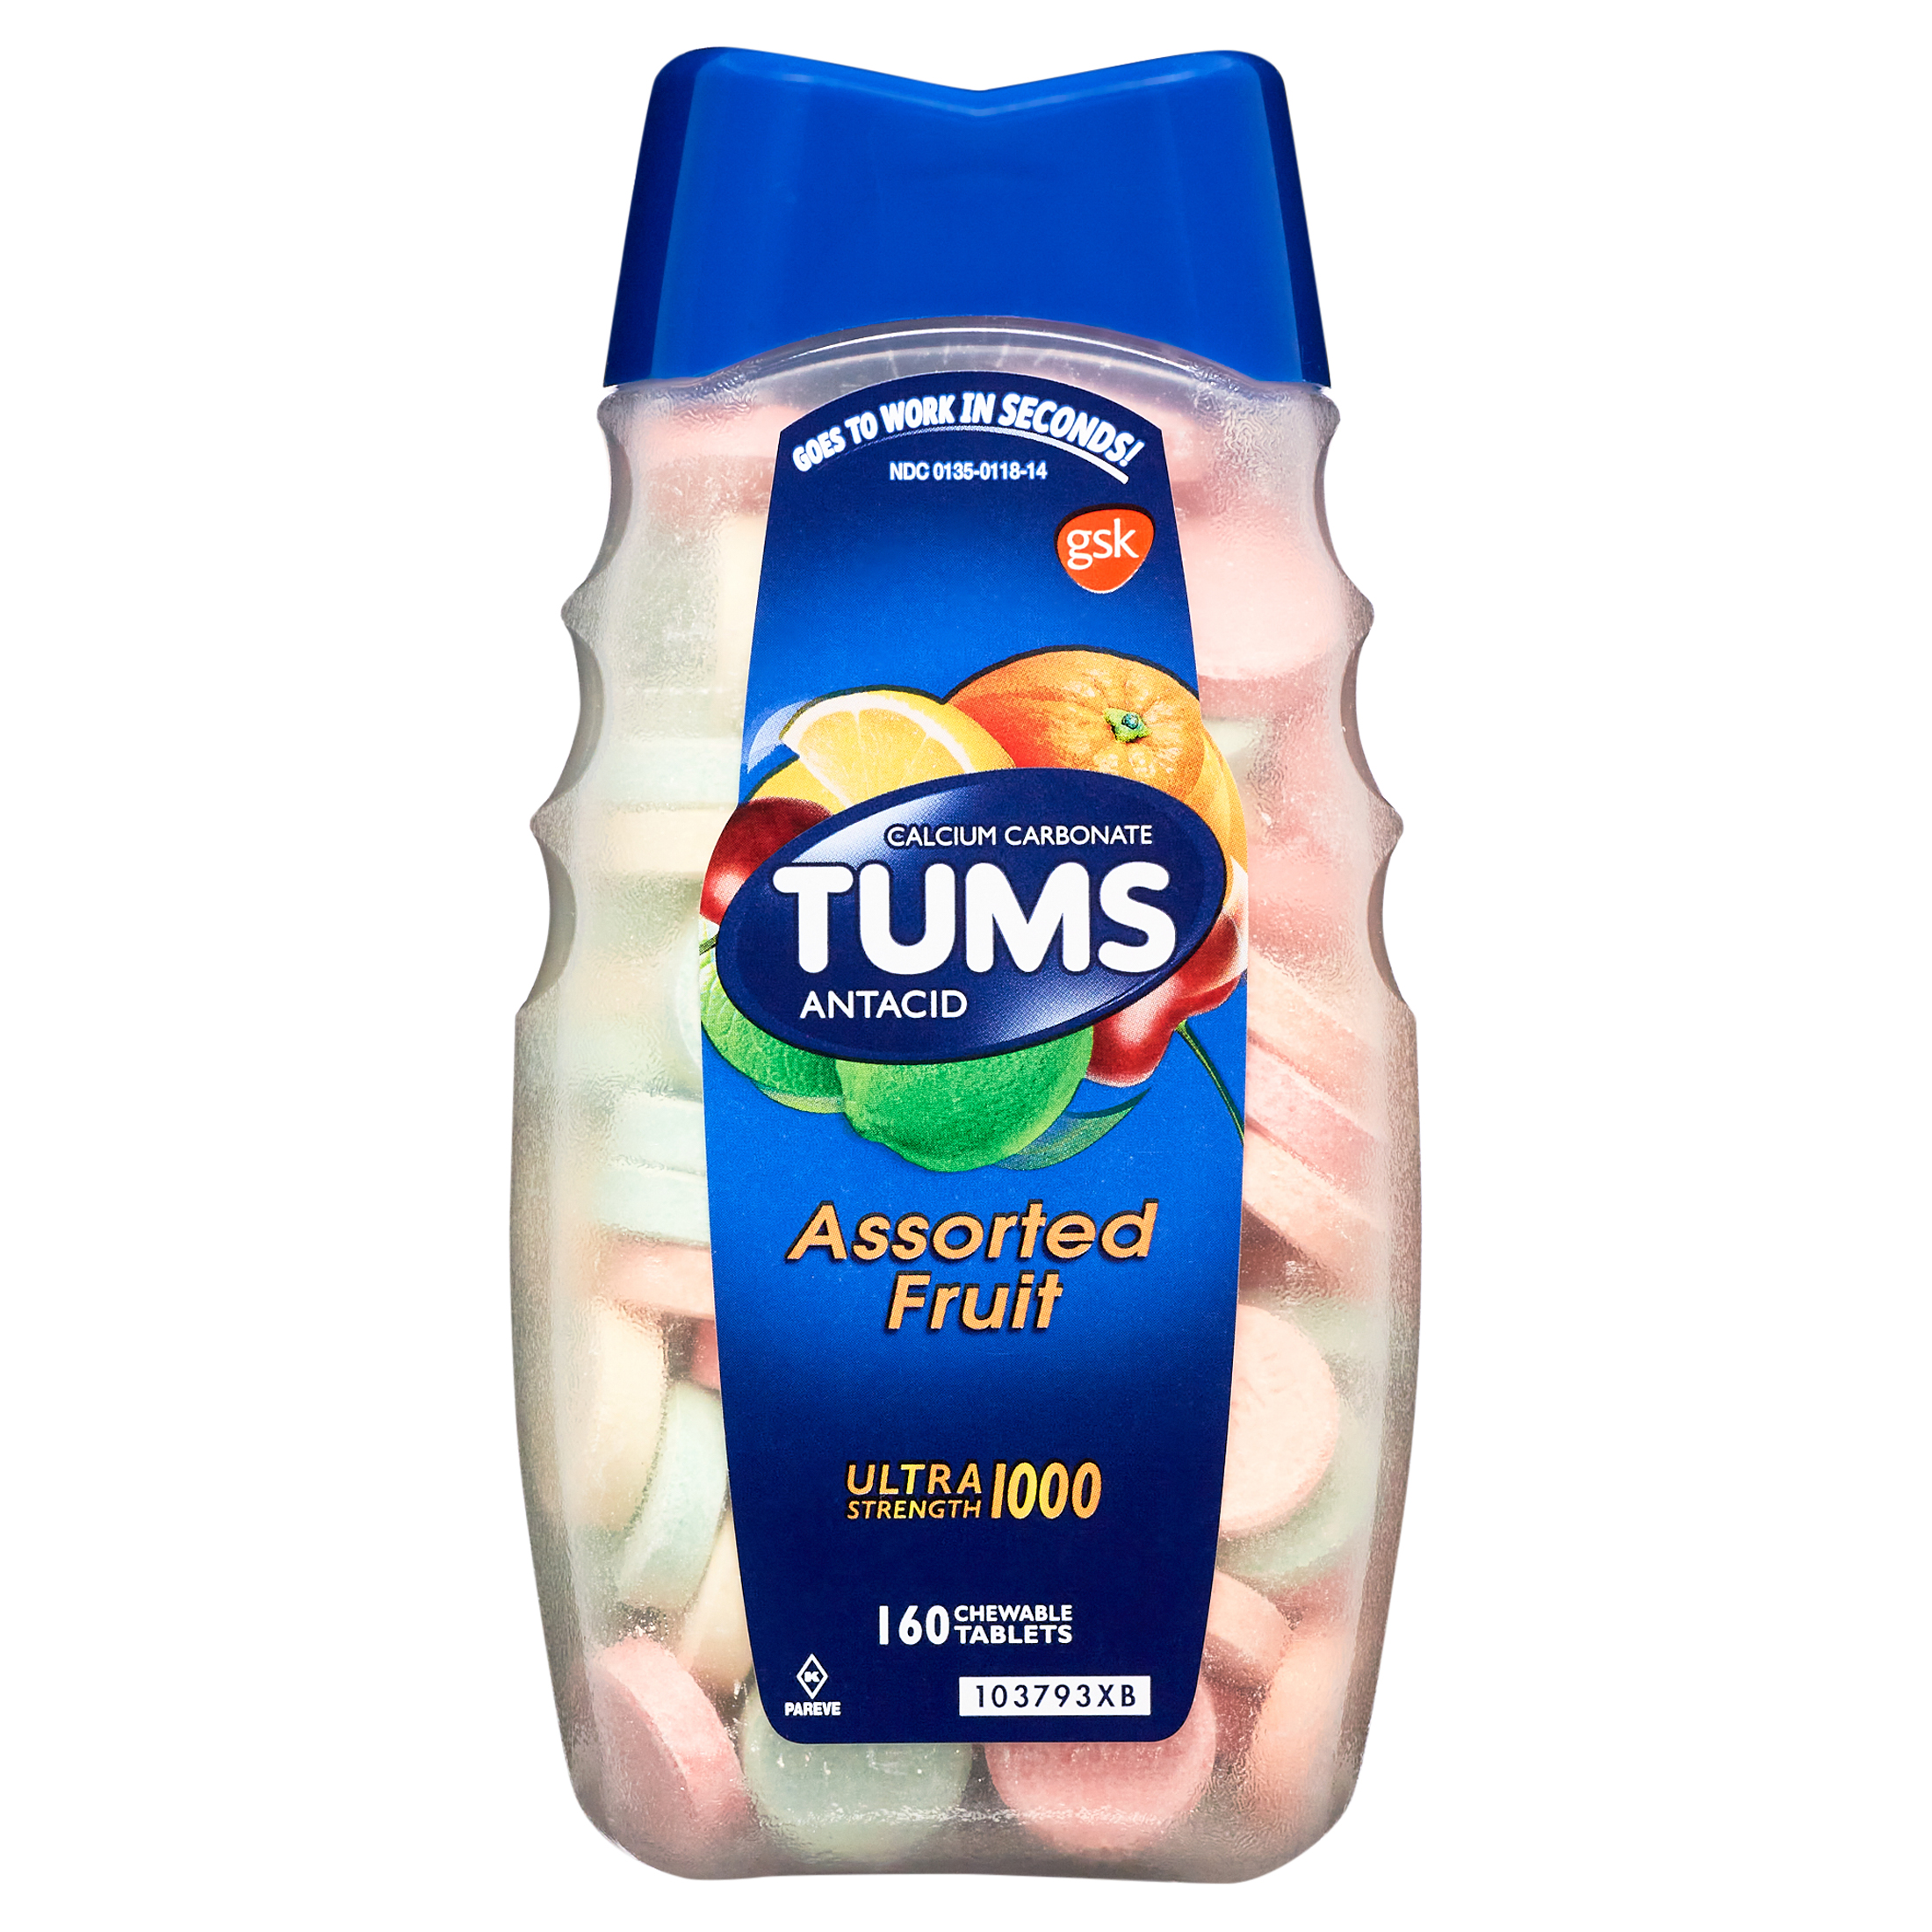 TUMS Ultra Strength Heartburn Relief Chewable Antacid Tablets, Fruit, 160 Count - image 1 of 13